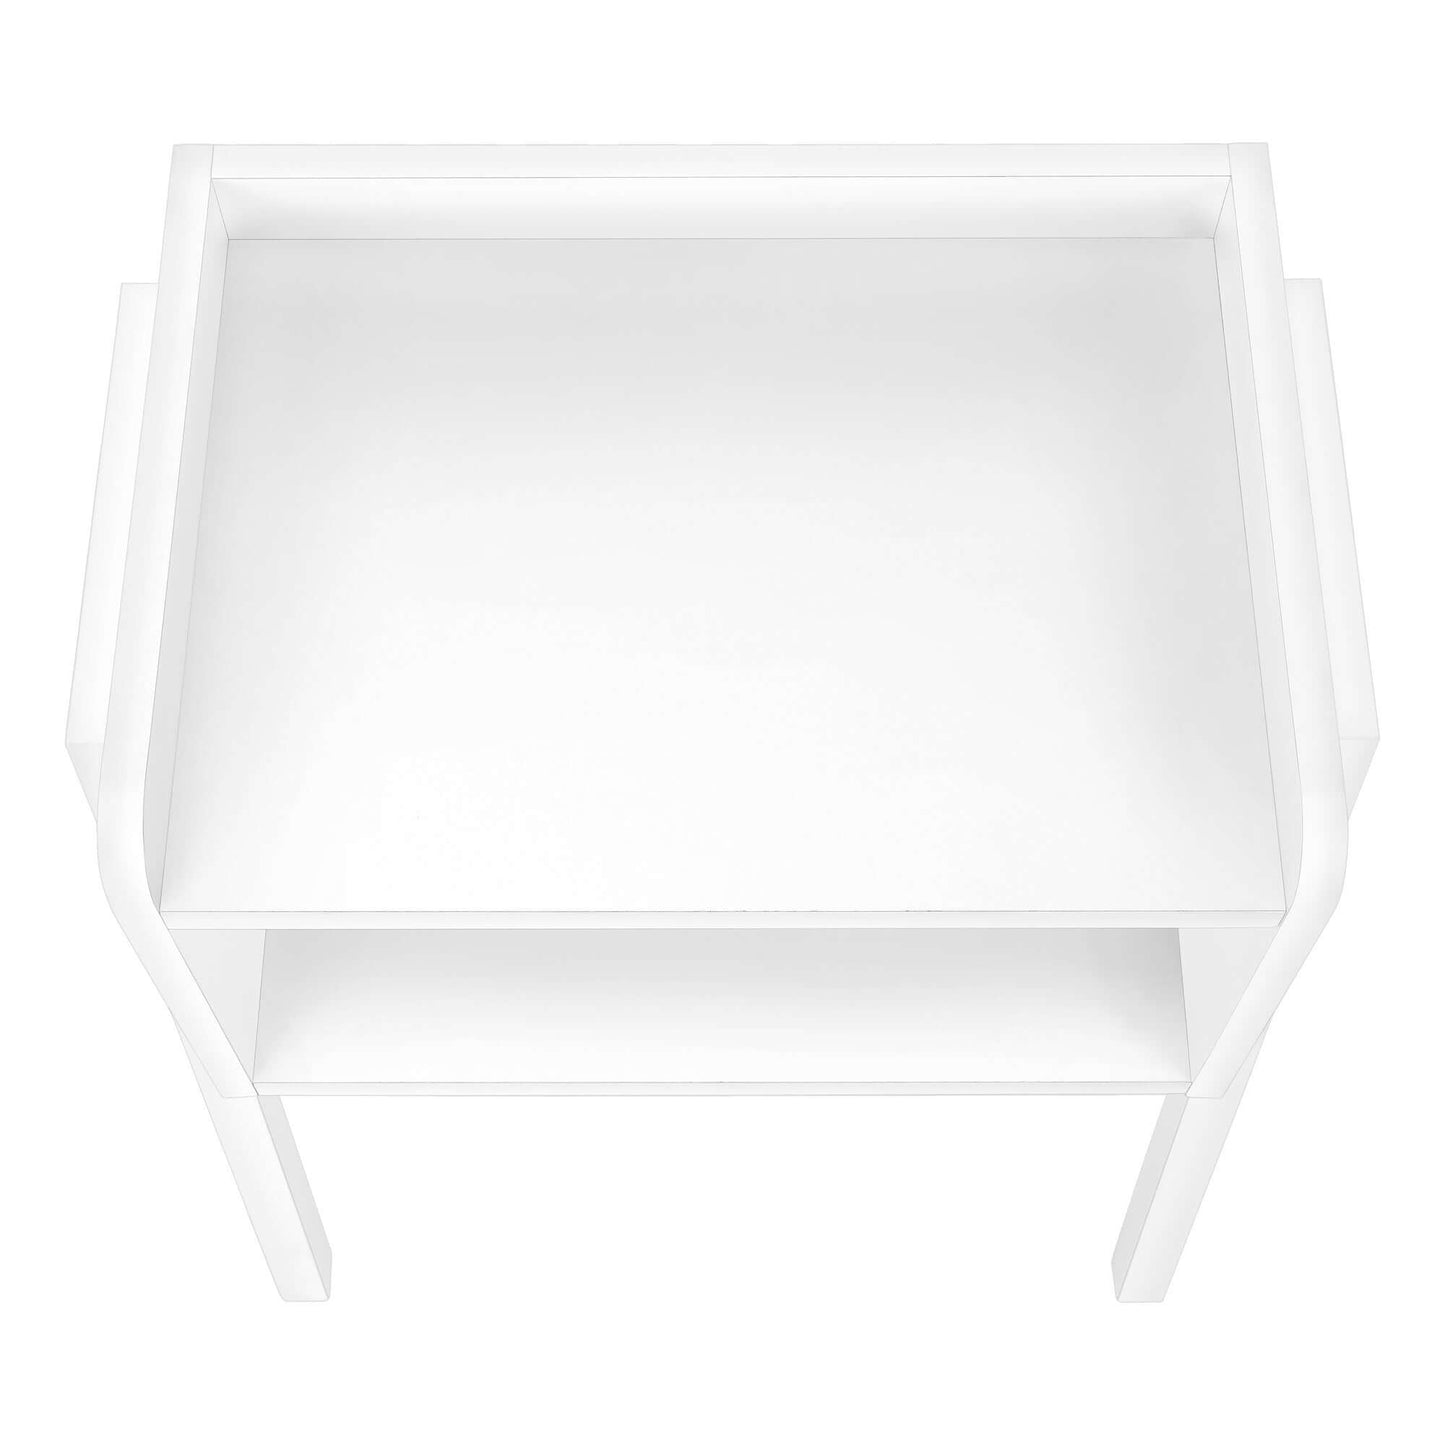 Modern Nightstand in White Finish with White Metal Frame